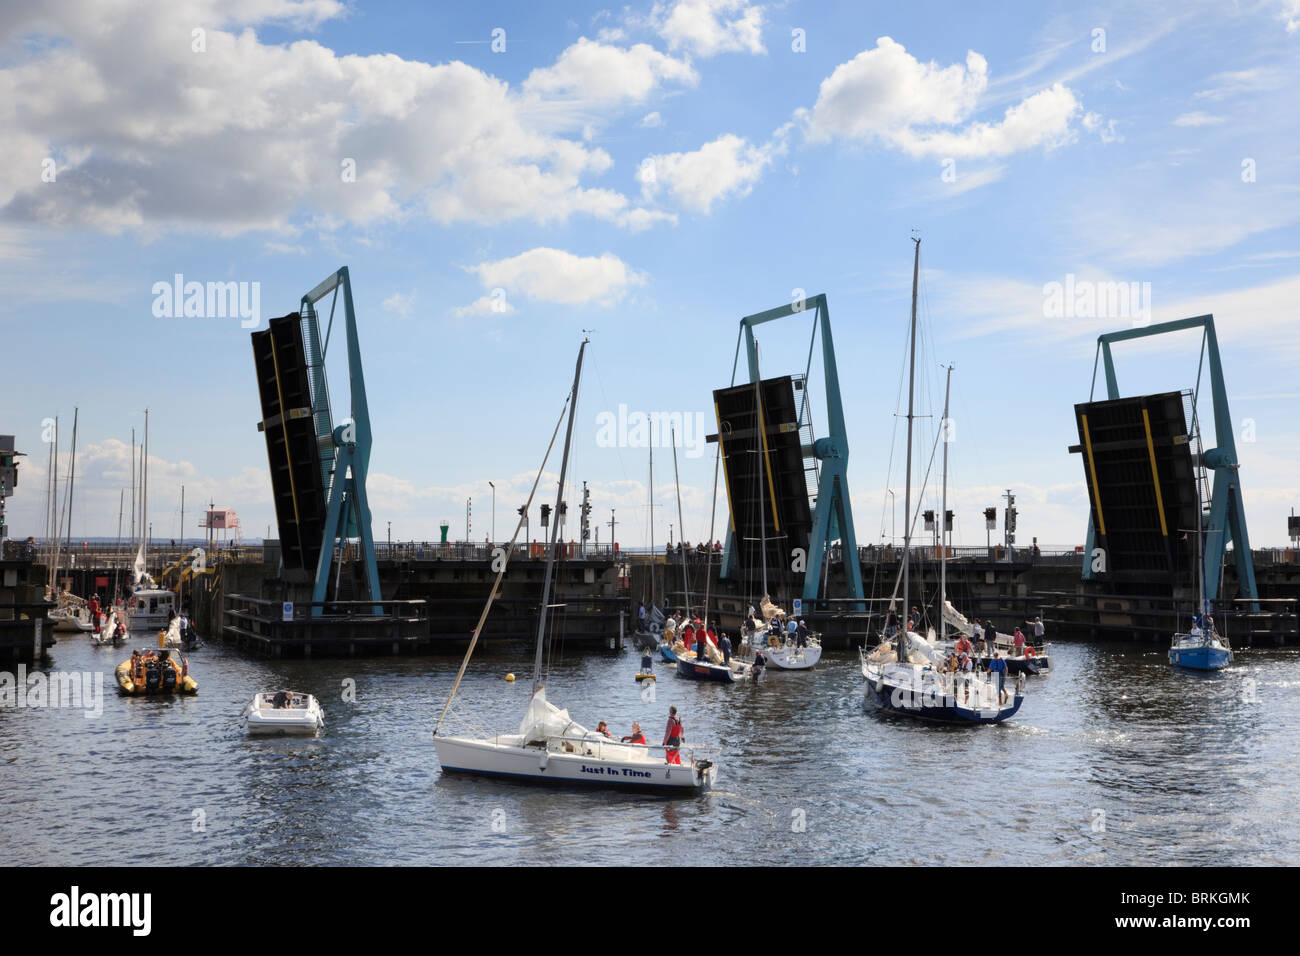 Cardiff Bay, South Wales, UK. Cardiff Barrage bascule bridges open to let boats into navigation locks from bay on landward side. Stock Photo